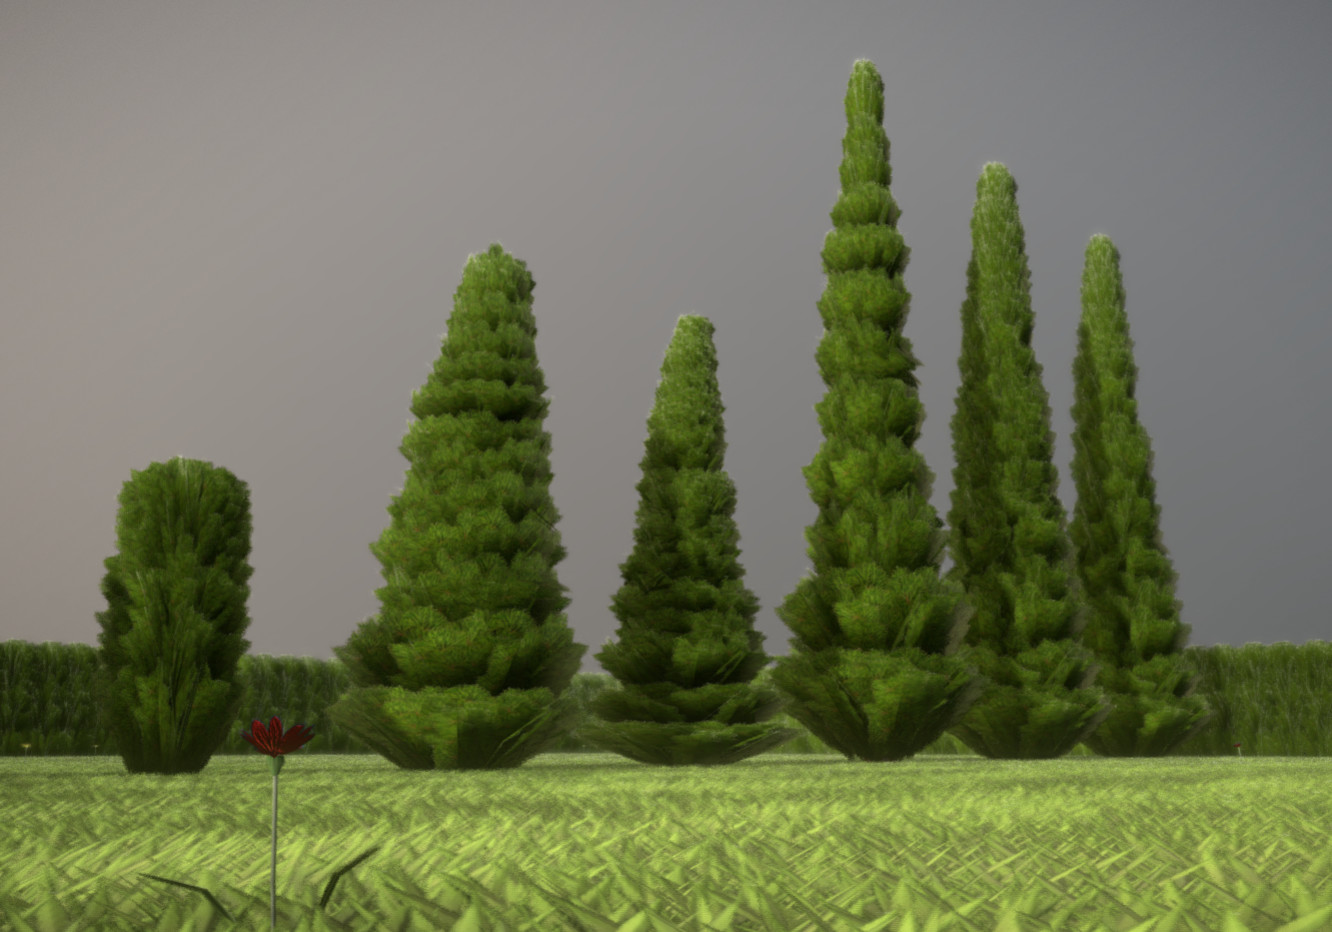 Some cypresses in different sizes.